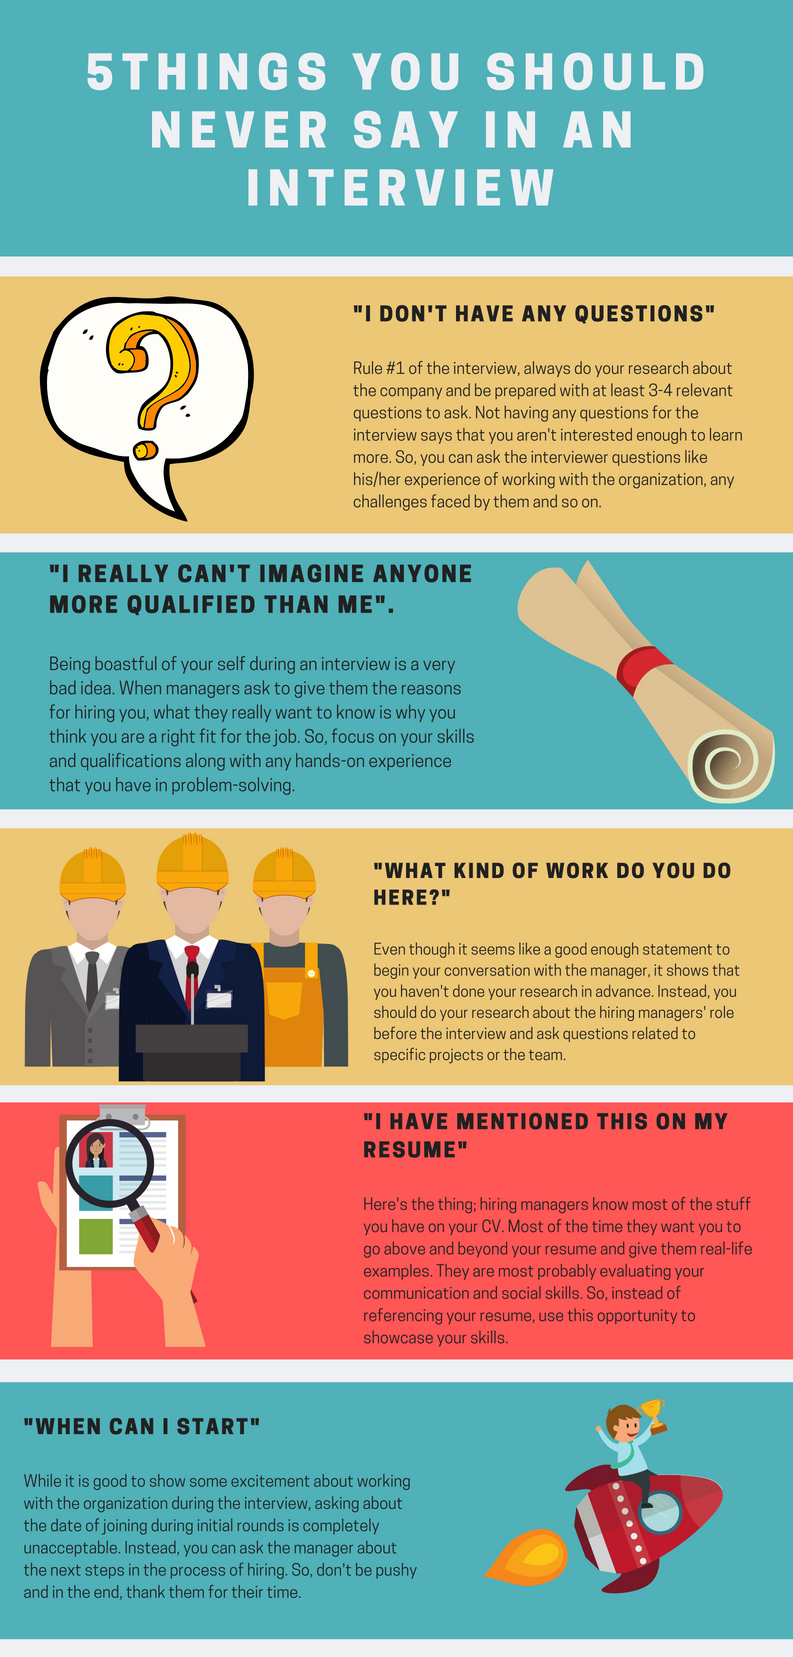 5 Things You Should Never Say in an Interview